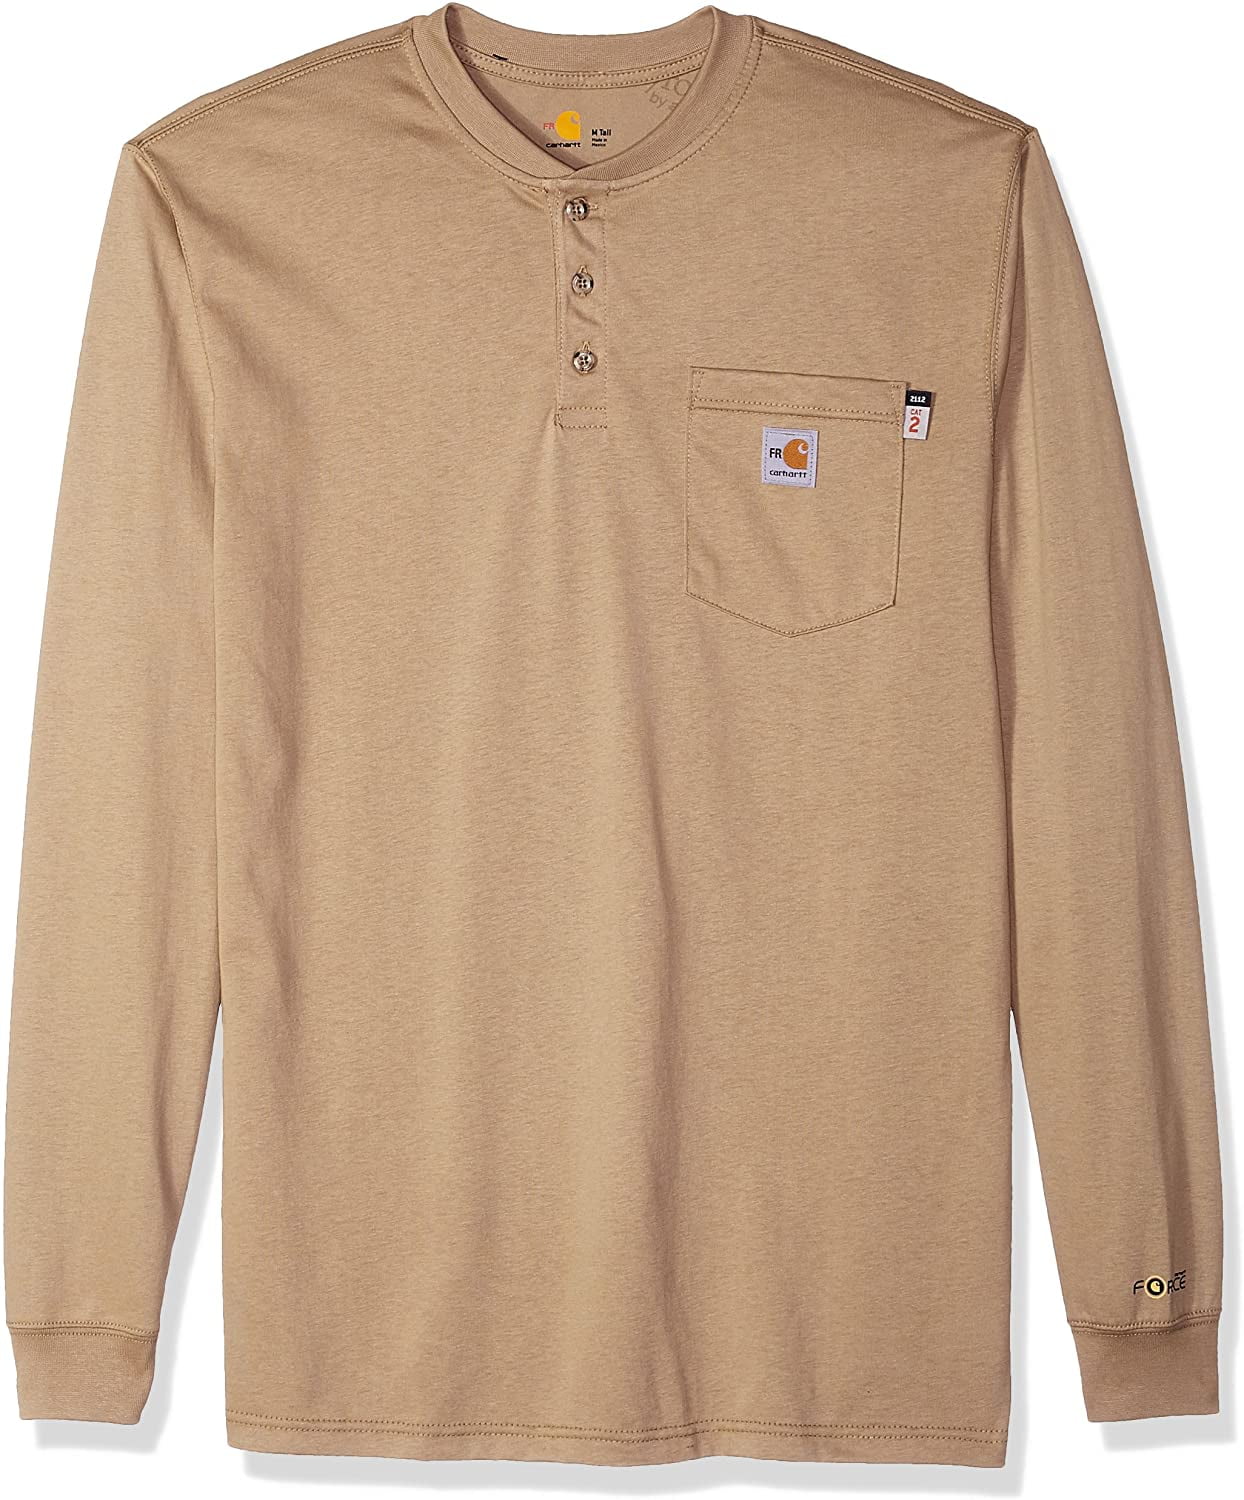 Carhartt Men's Big & Tall Flame Resistant Force Cotton Long Sleeve ...